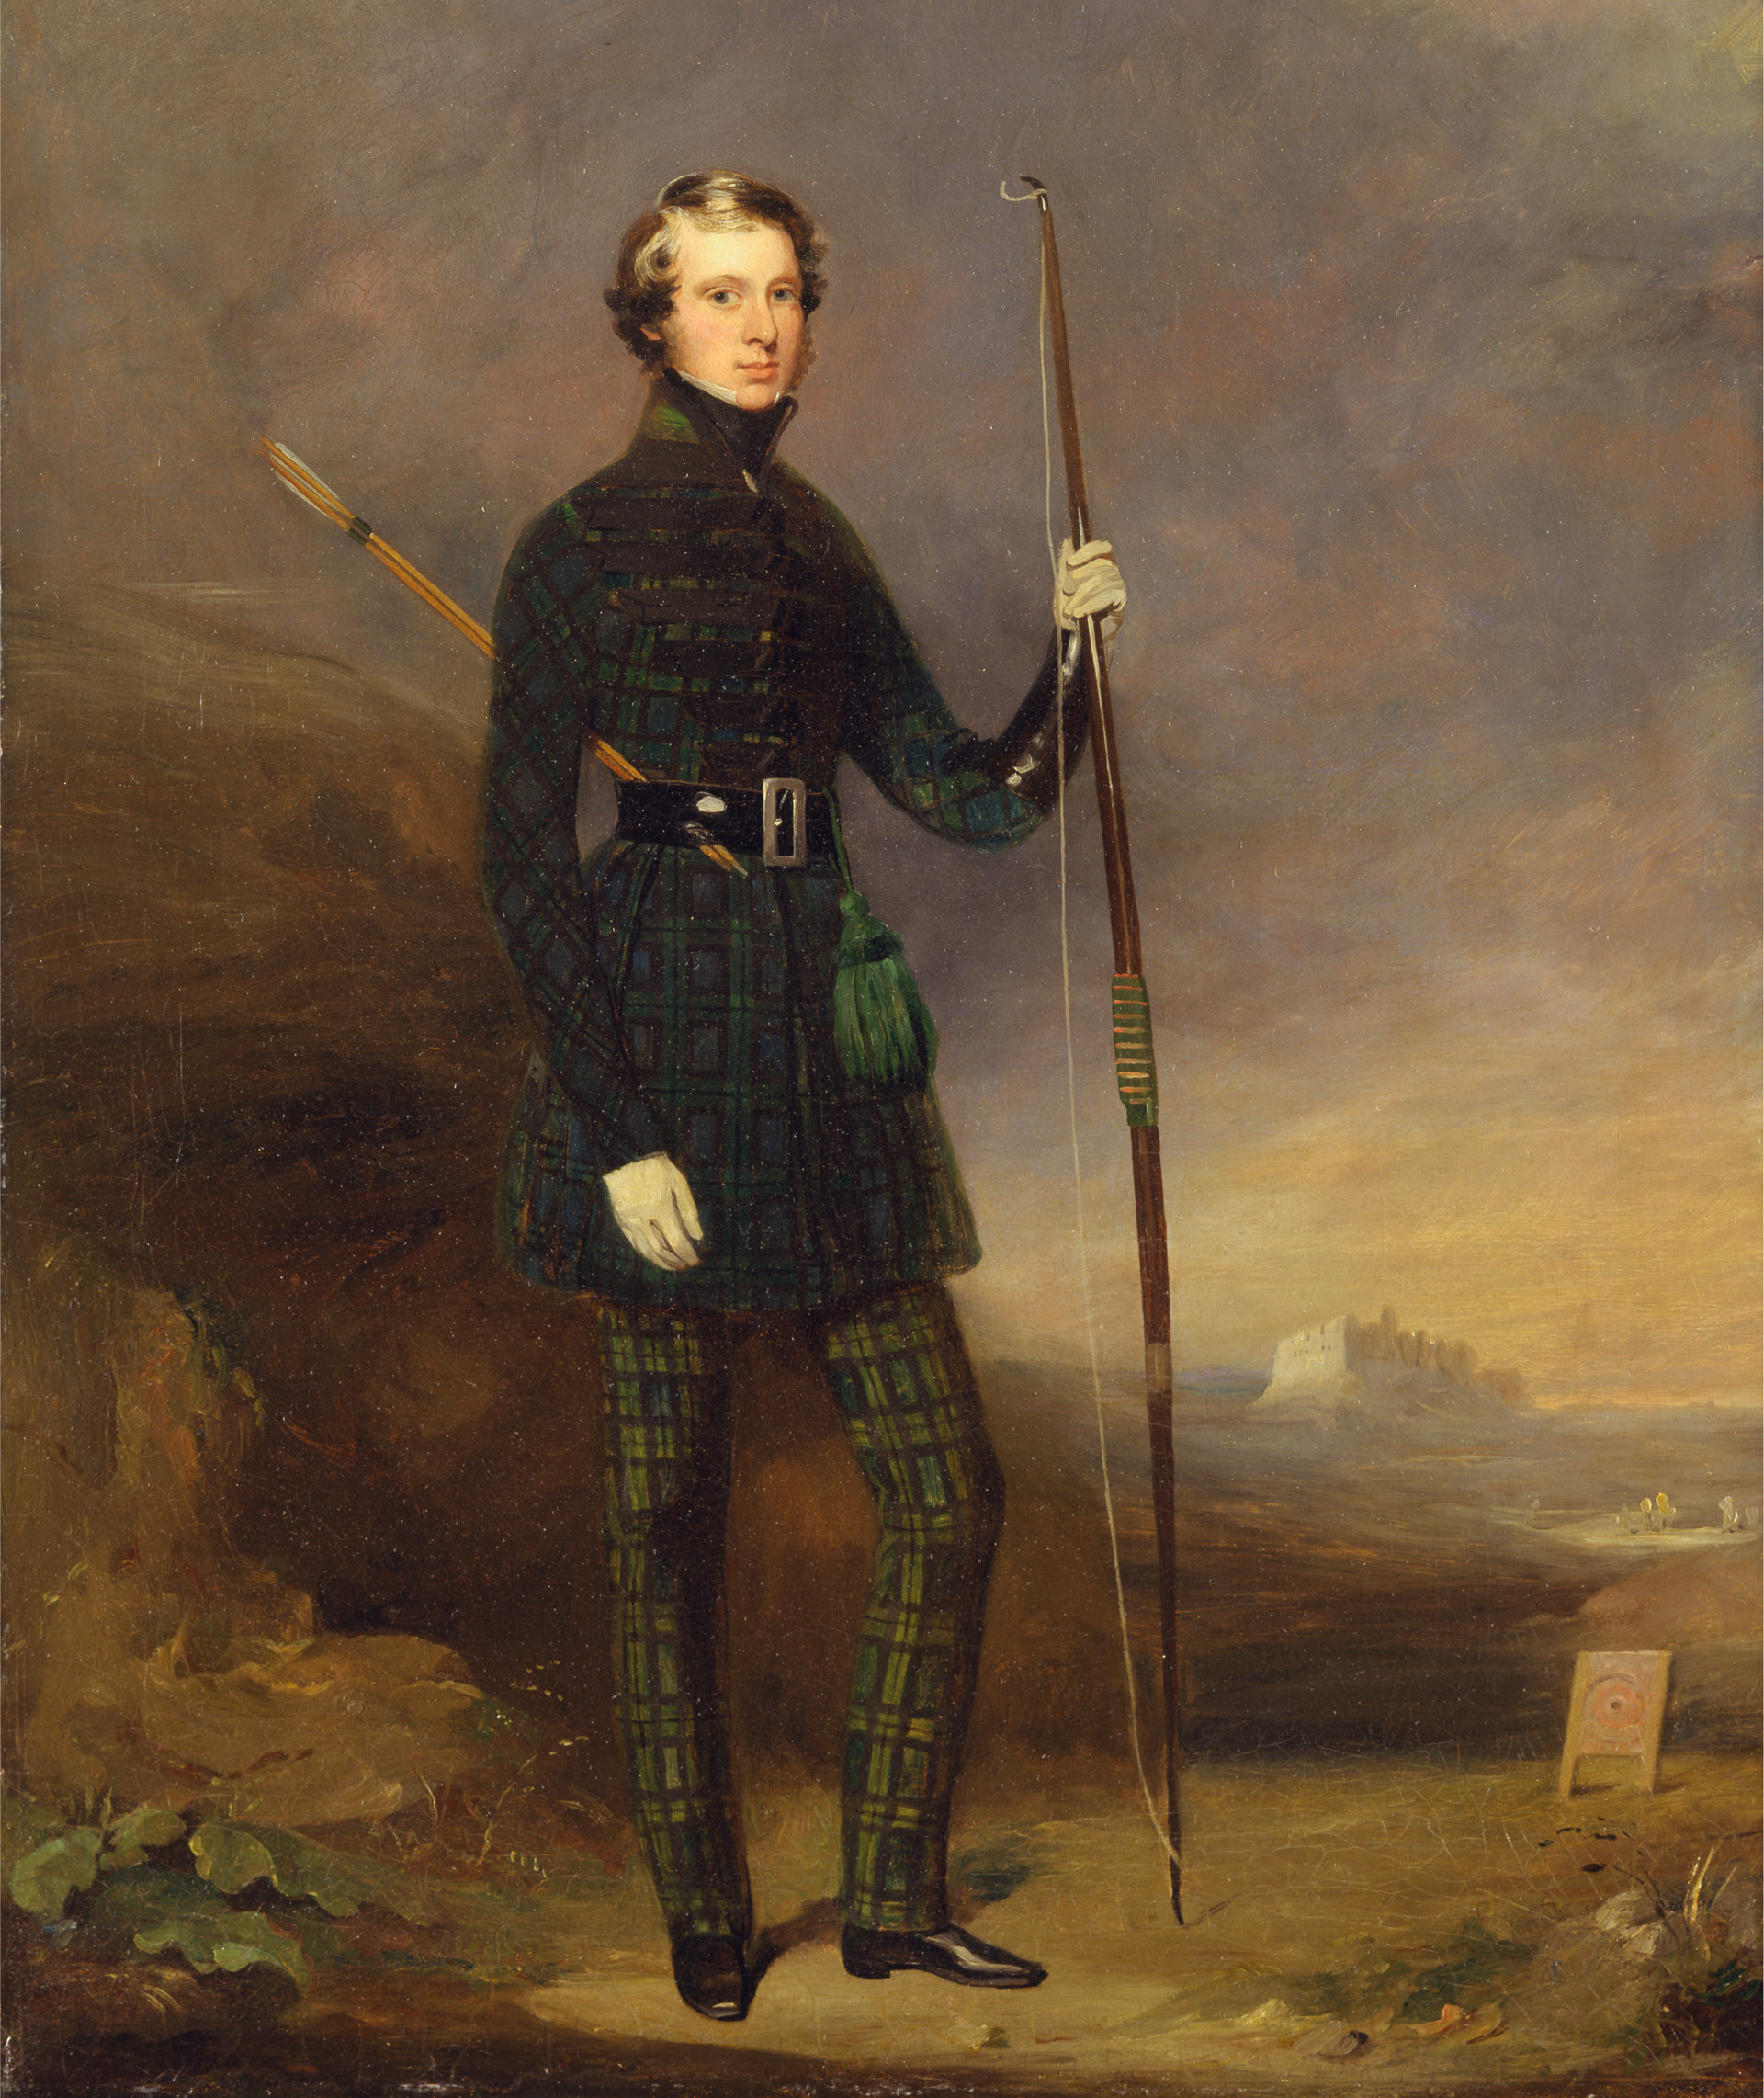 Before setting out for Australia in 1839, Sir John has his portrait painted in oils by Mungo Burton, in the Uniform of the Albion Archers. Yale Center for British Art, Paul Mellon Collection.